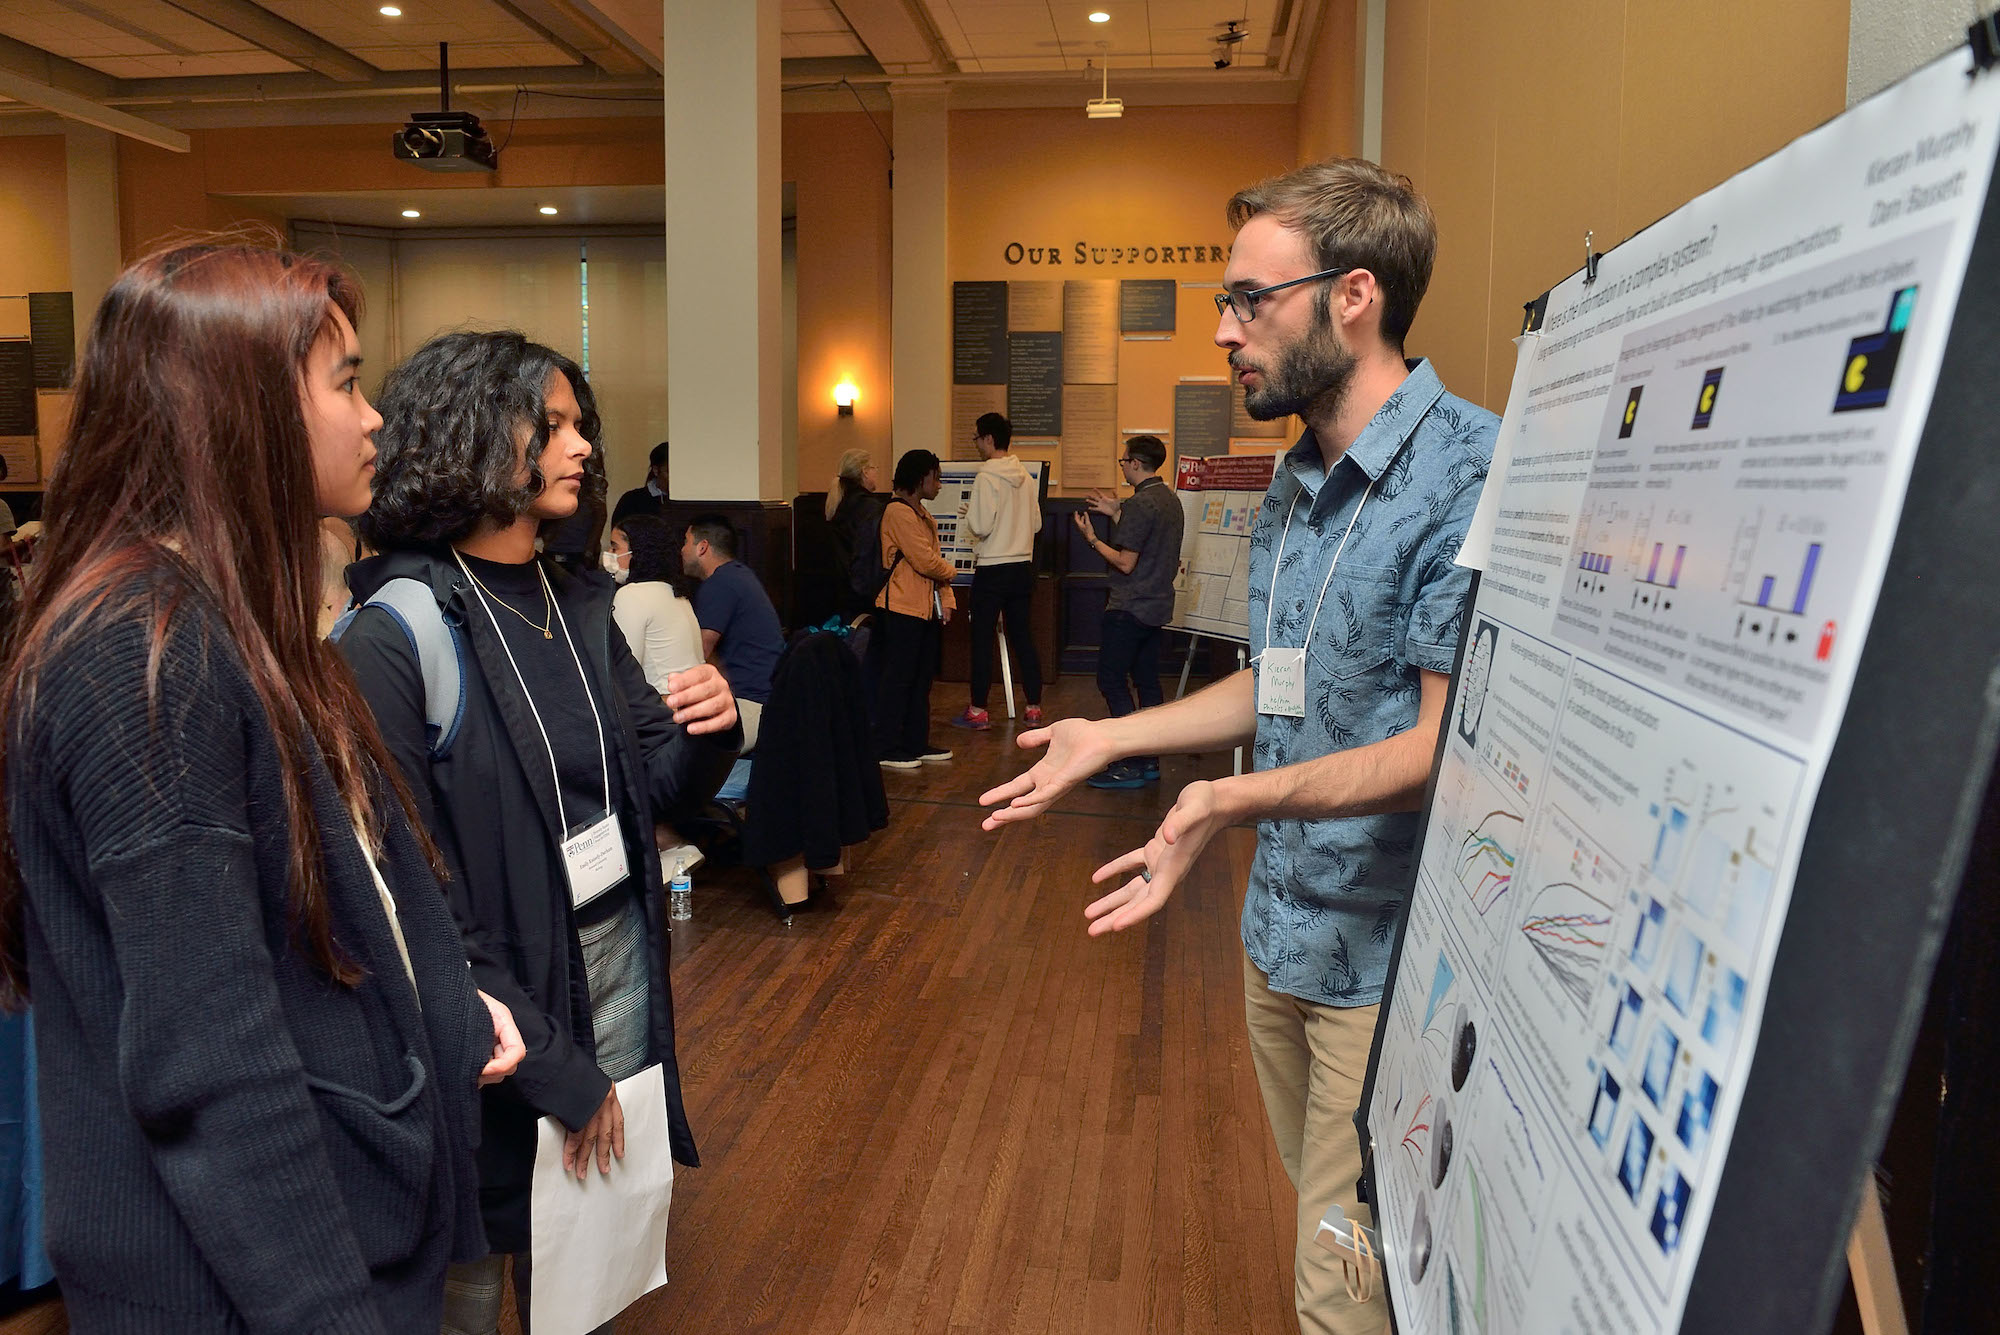 Student talks to two others while standing beside a research poster